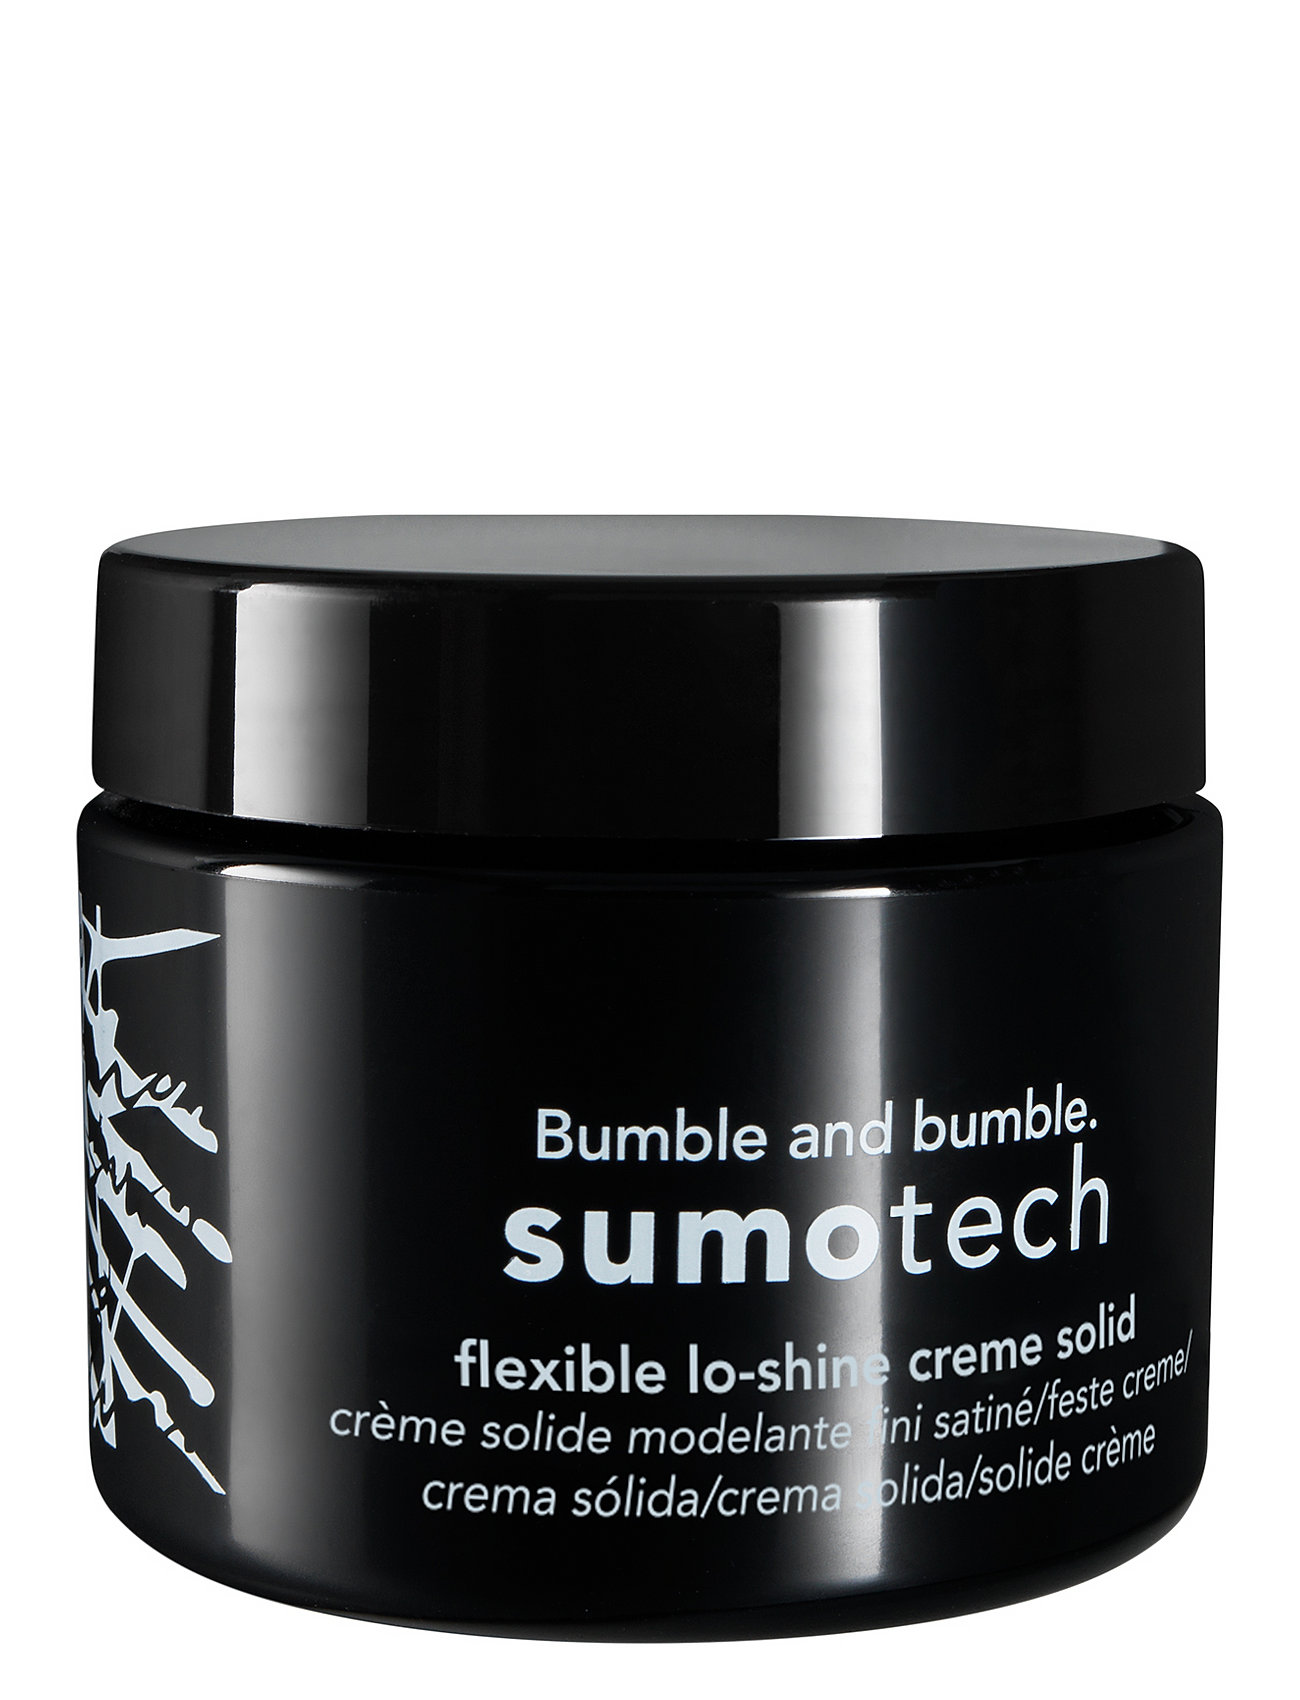 Sumotech Wax & Gel Nude Bumble And Bumble